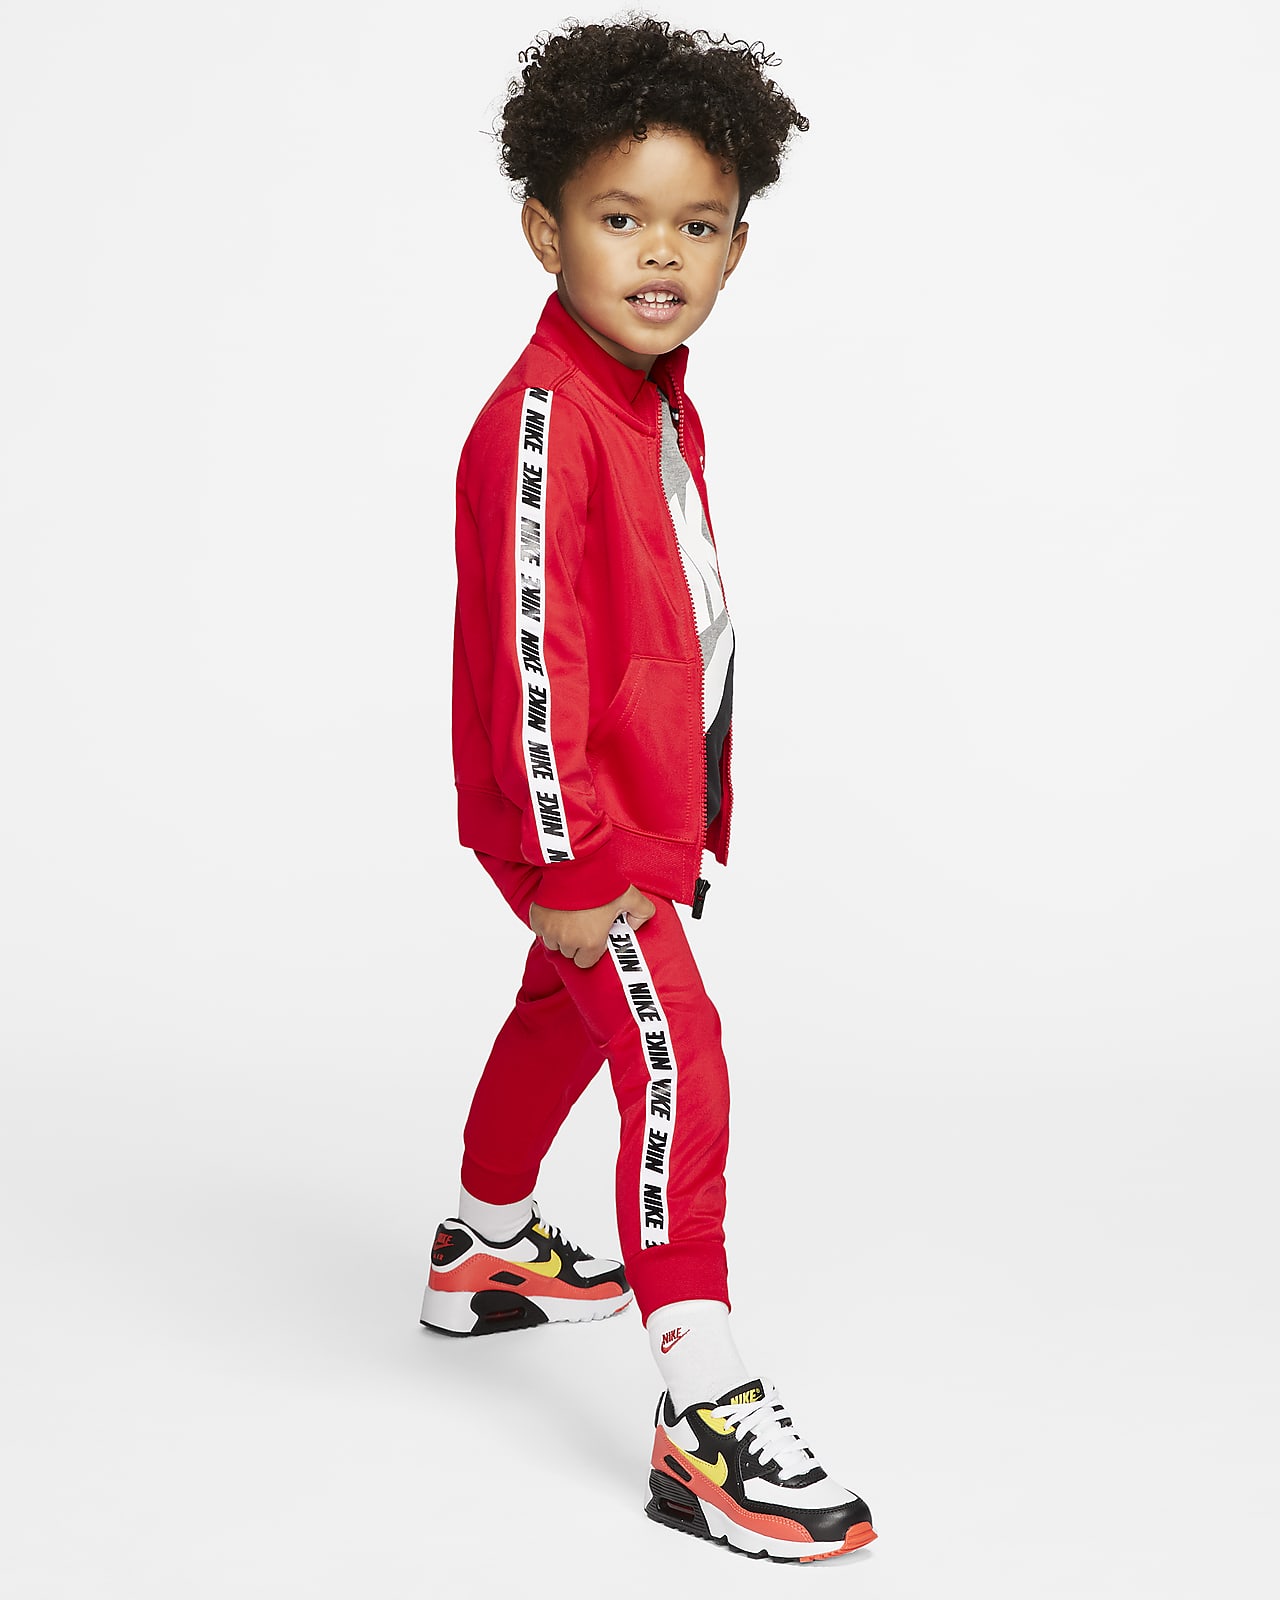 How To Be A Child Model For Nike - Kids Teens Nike Commercial Auditions ...